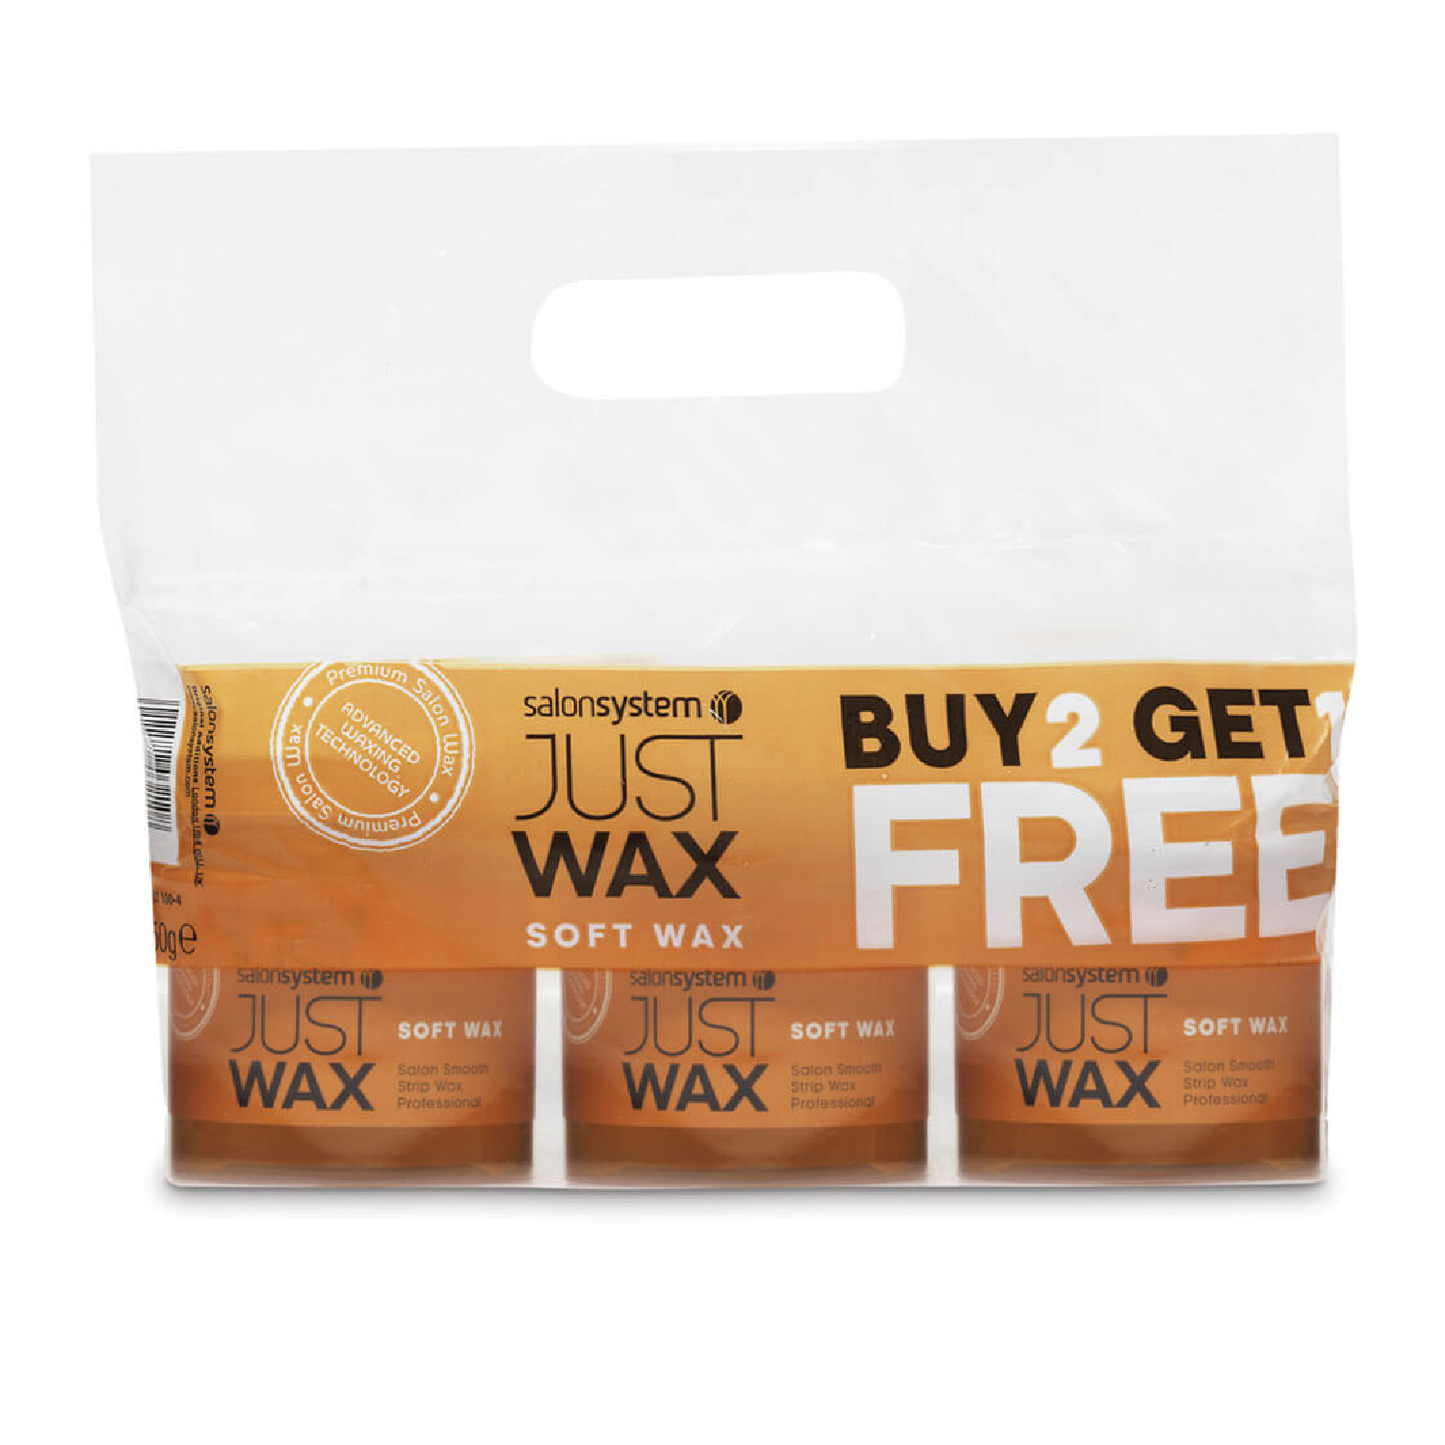 Just Wax Strip Soft Wax 3 for 2 Offer